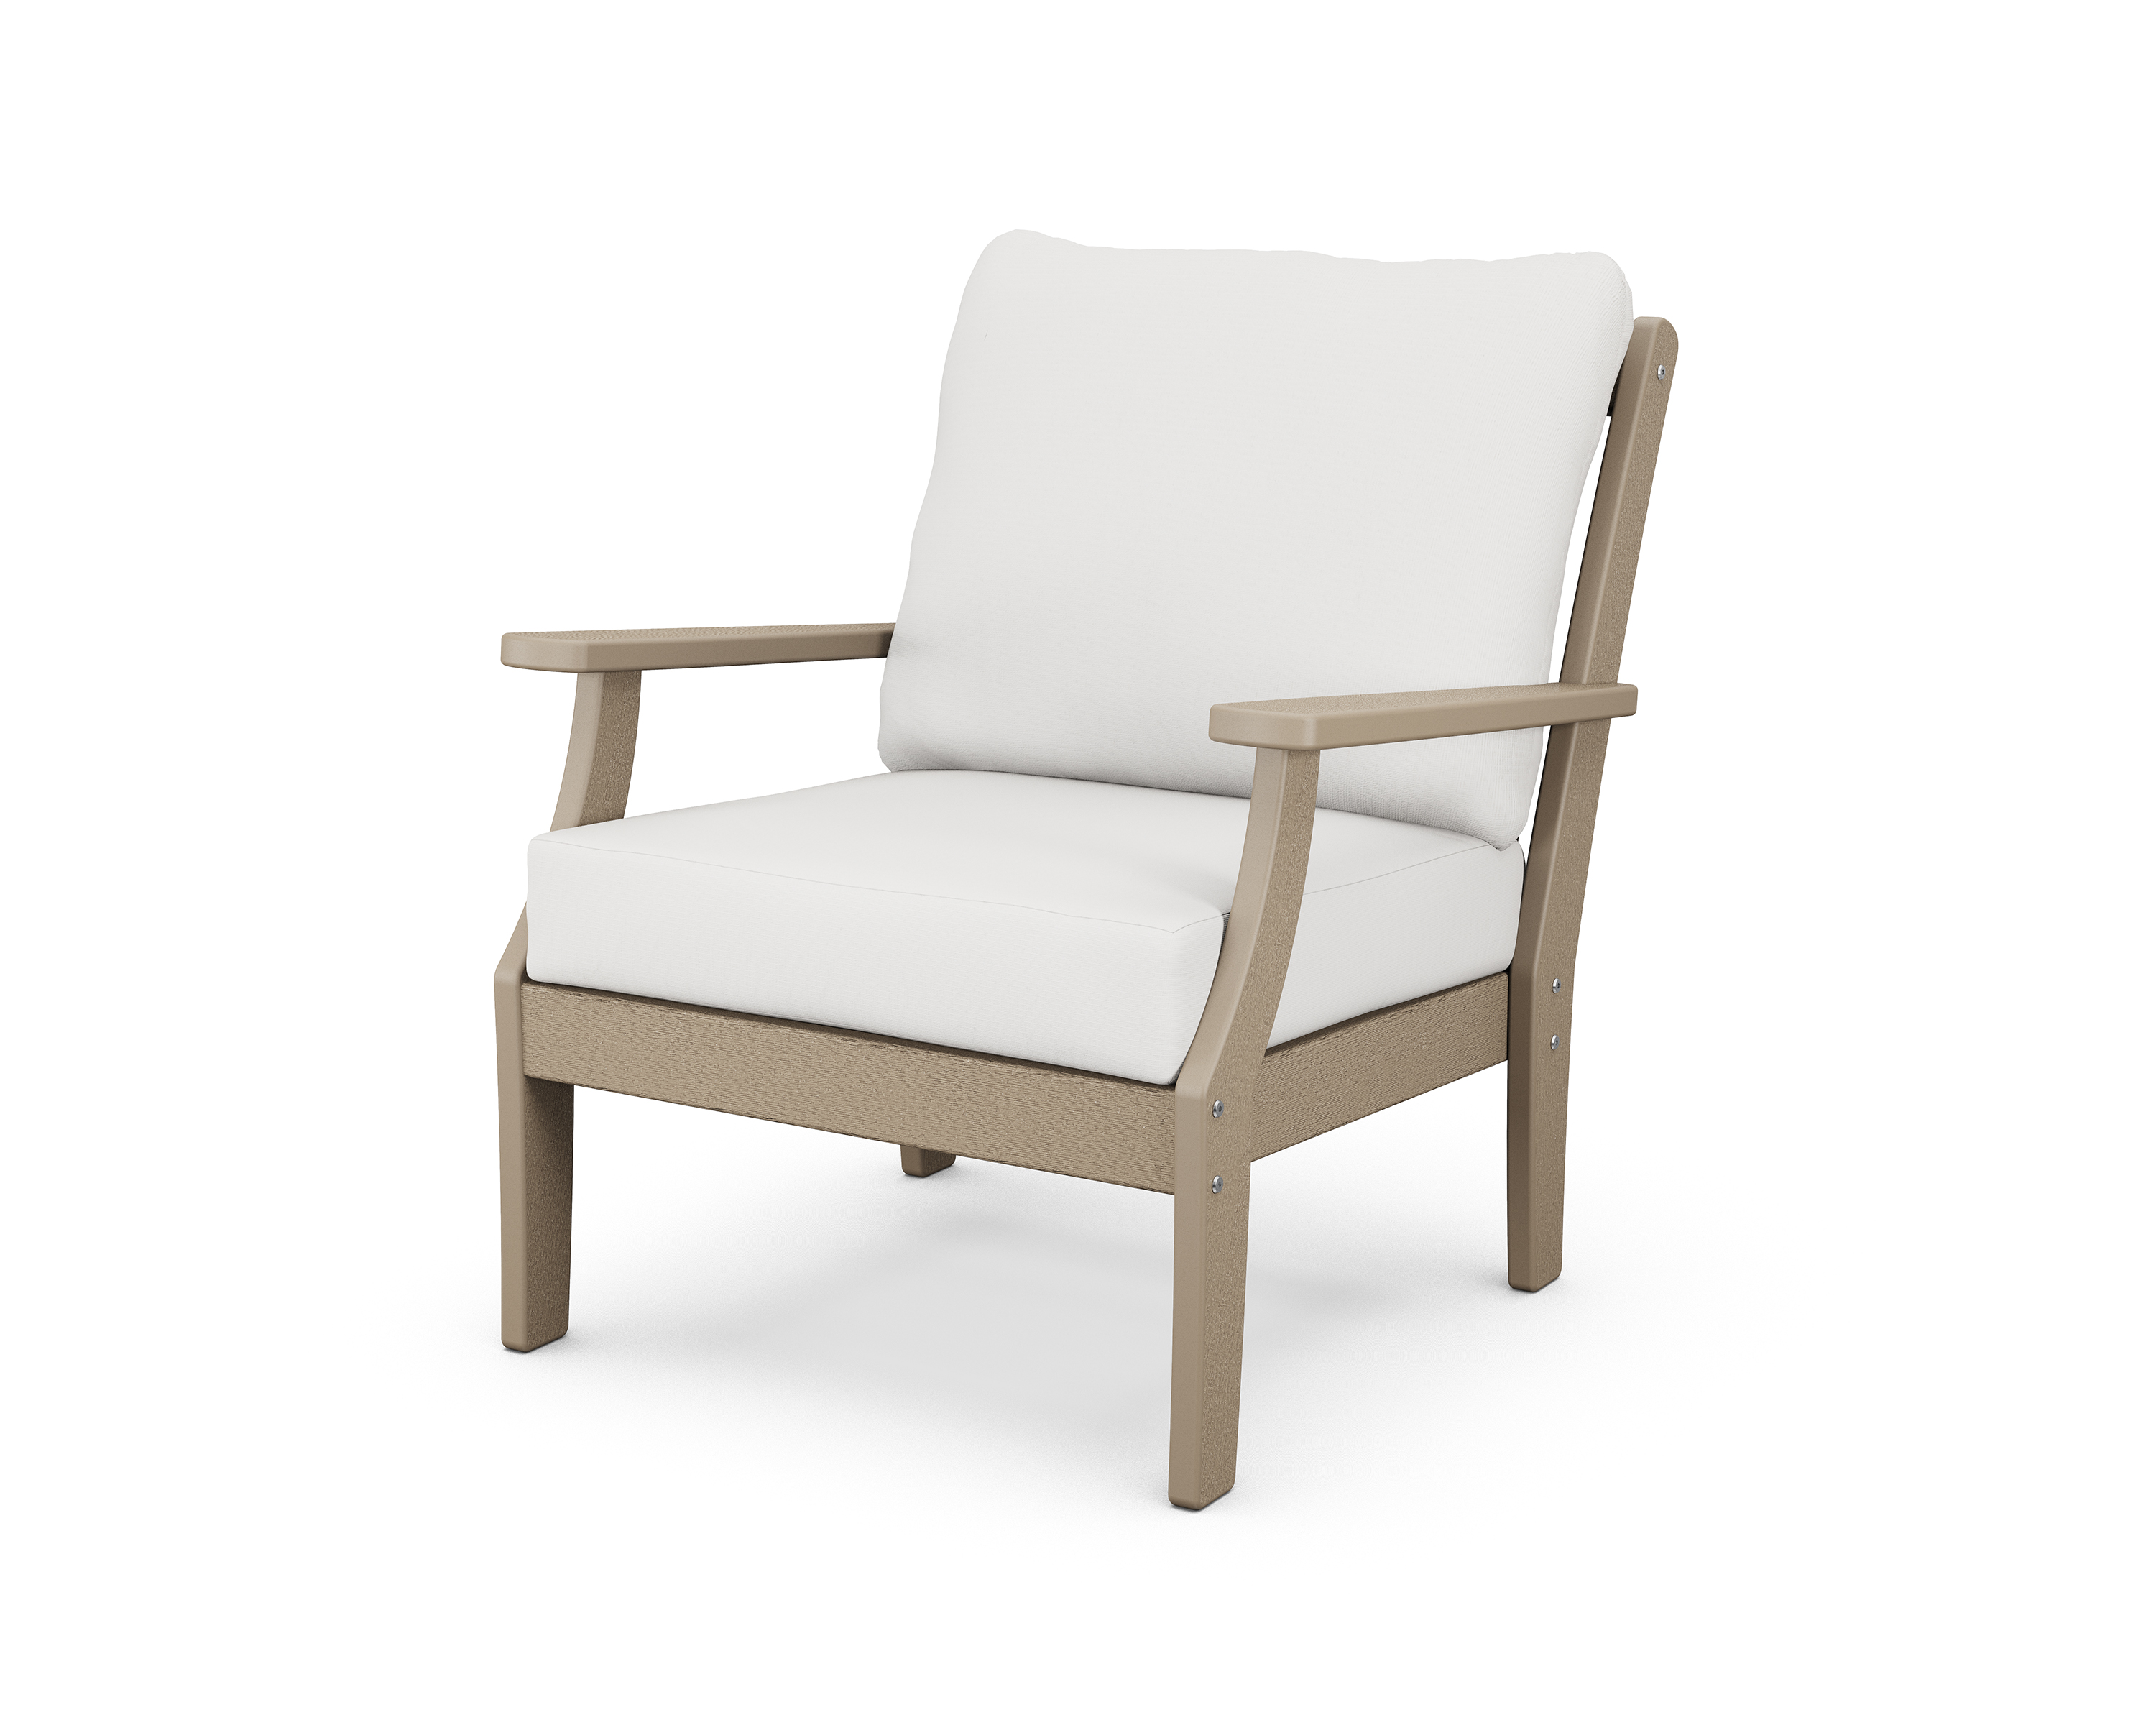 braxton deep seating chair in vintage sahara / textured linen product image